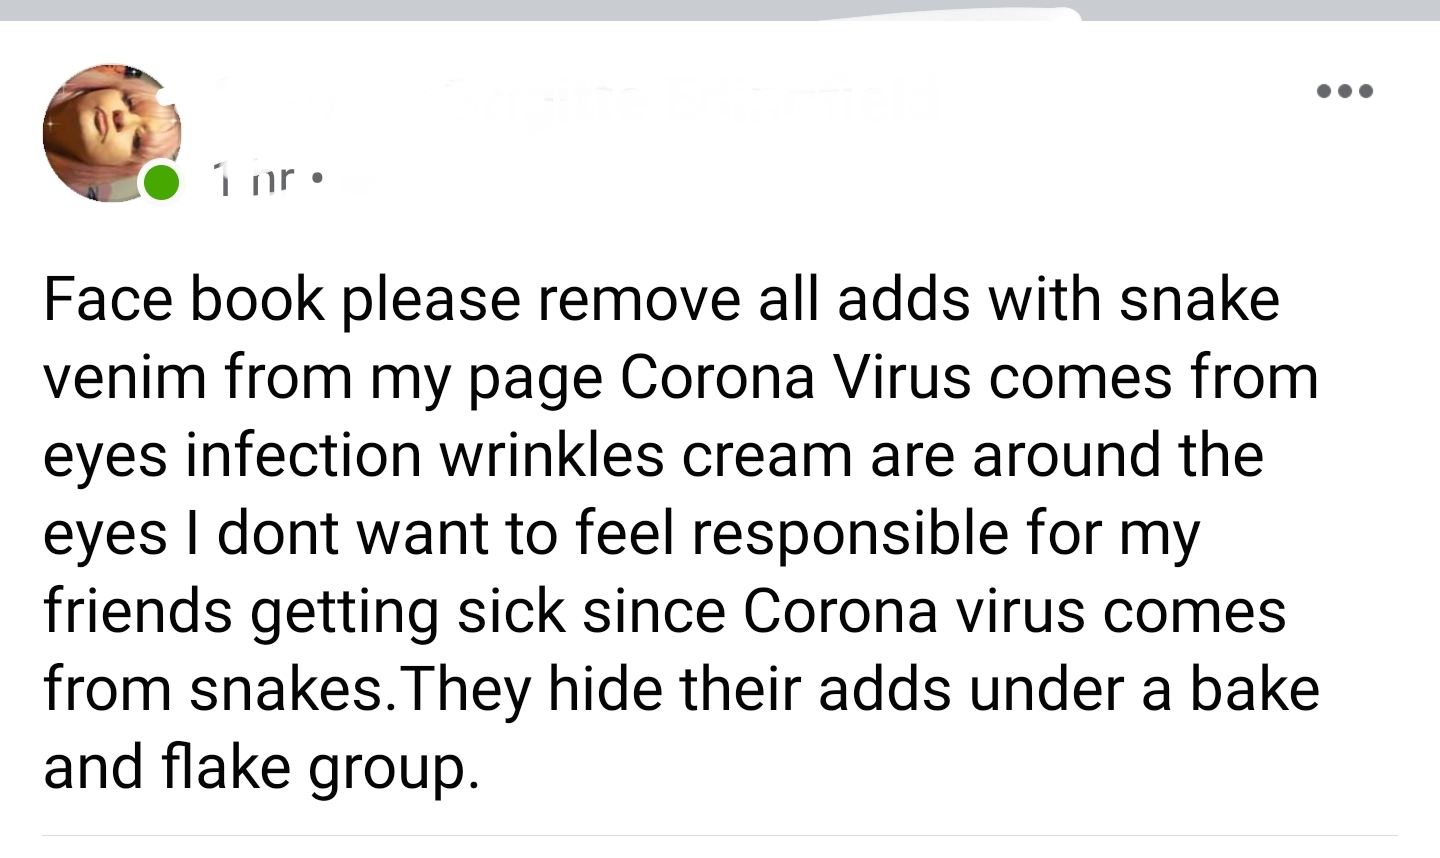 document - 01 nr Face book please remove all adds with snake venim from my page Corona Virus comes from eyes infection wrinkles cream are around the eyes I dont want to feel responsible for my friends getting sick since Corona virus comes from snakes. The